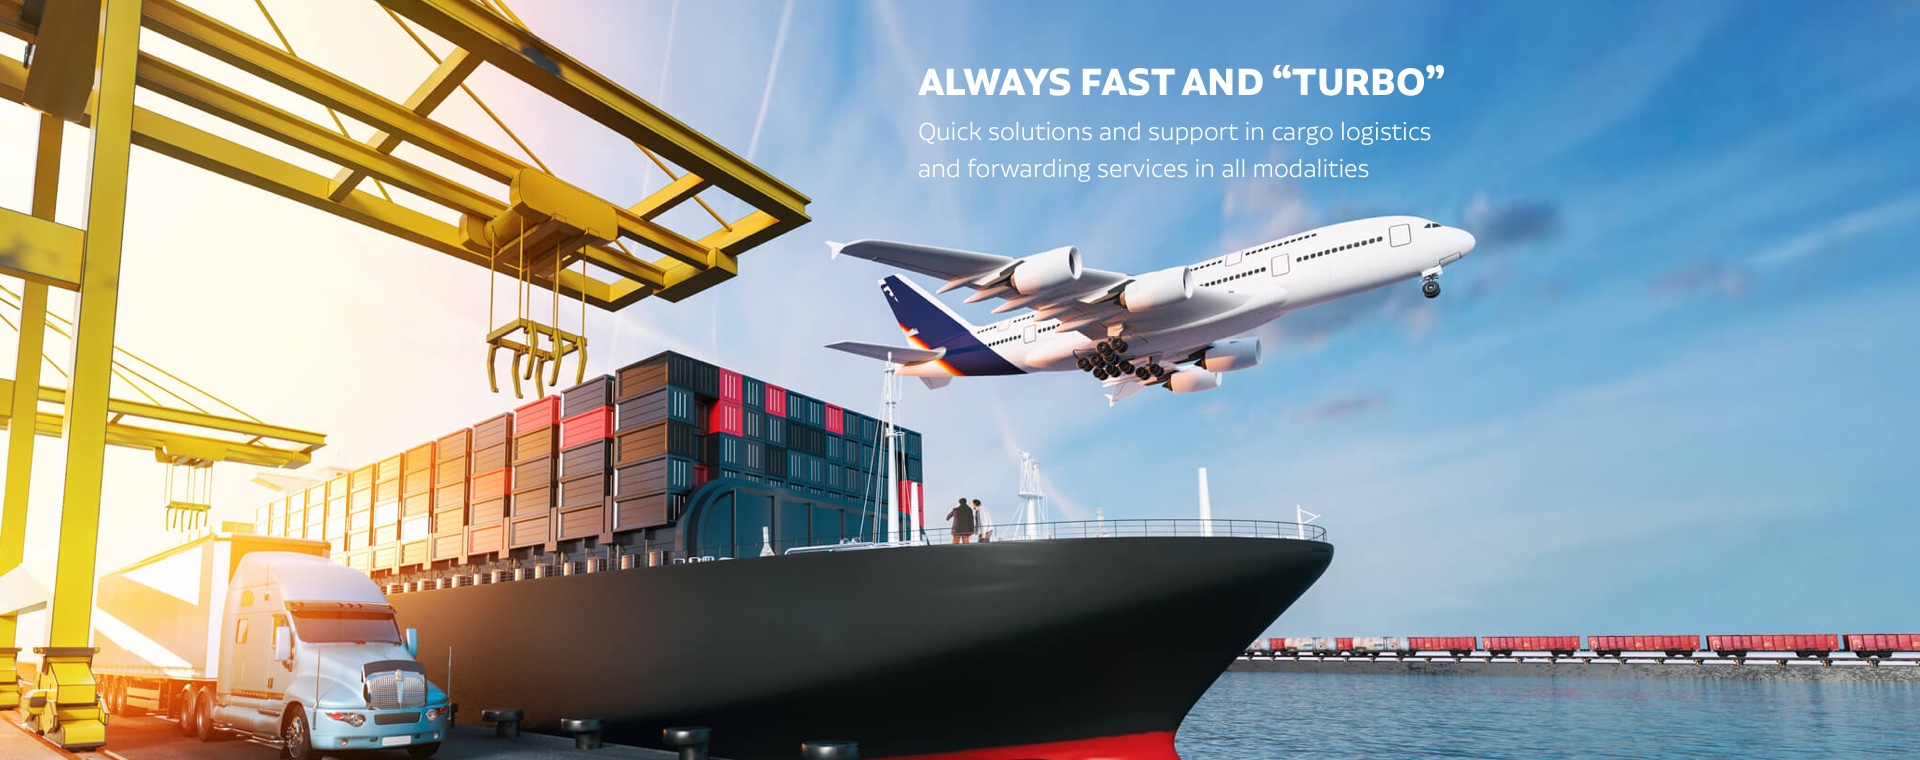 Always fast and turbo: Quick solutions and support in cargo logistics and forwarding services in all modalities